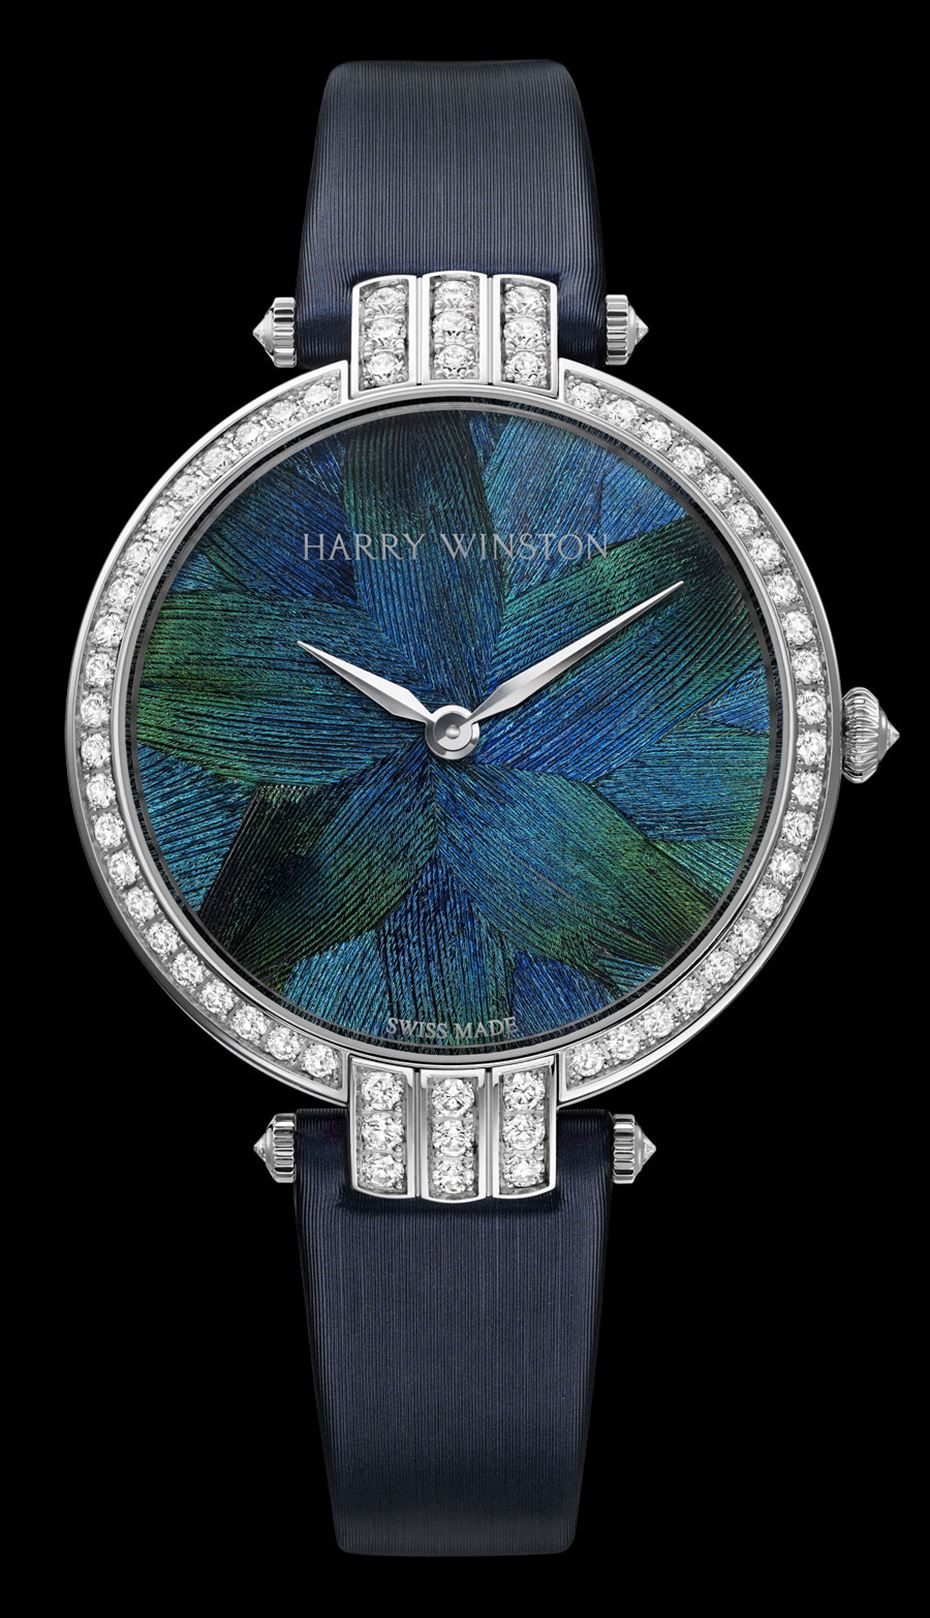 Premier Feathers, a women's watch introduced by Harry Winston in 2012